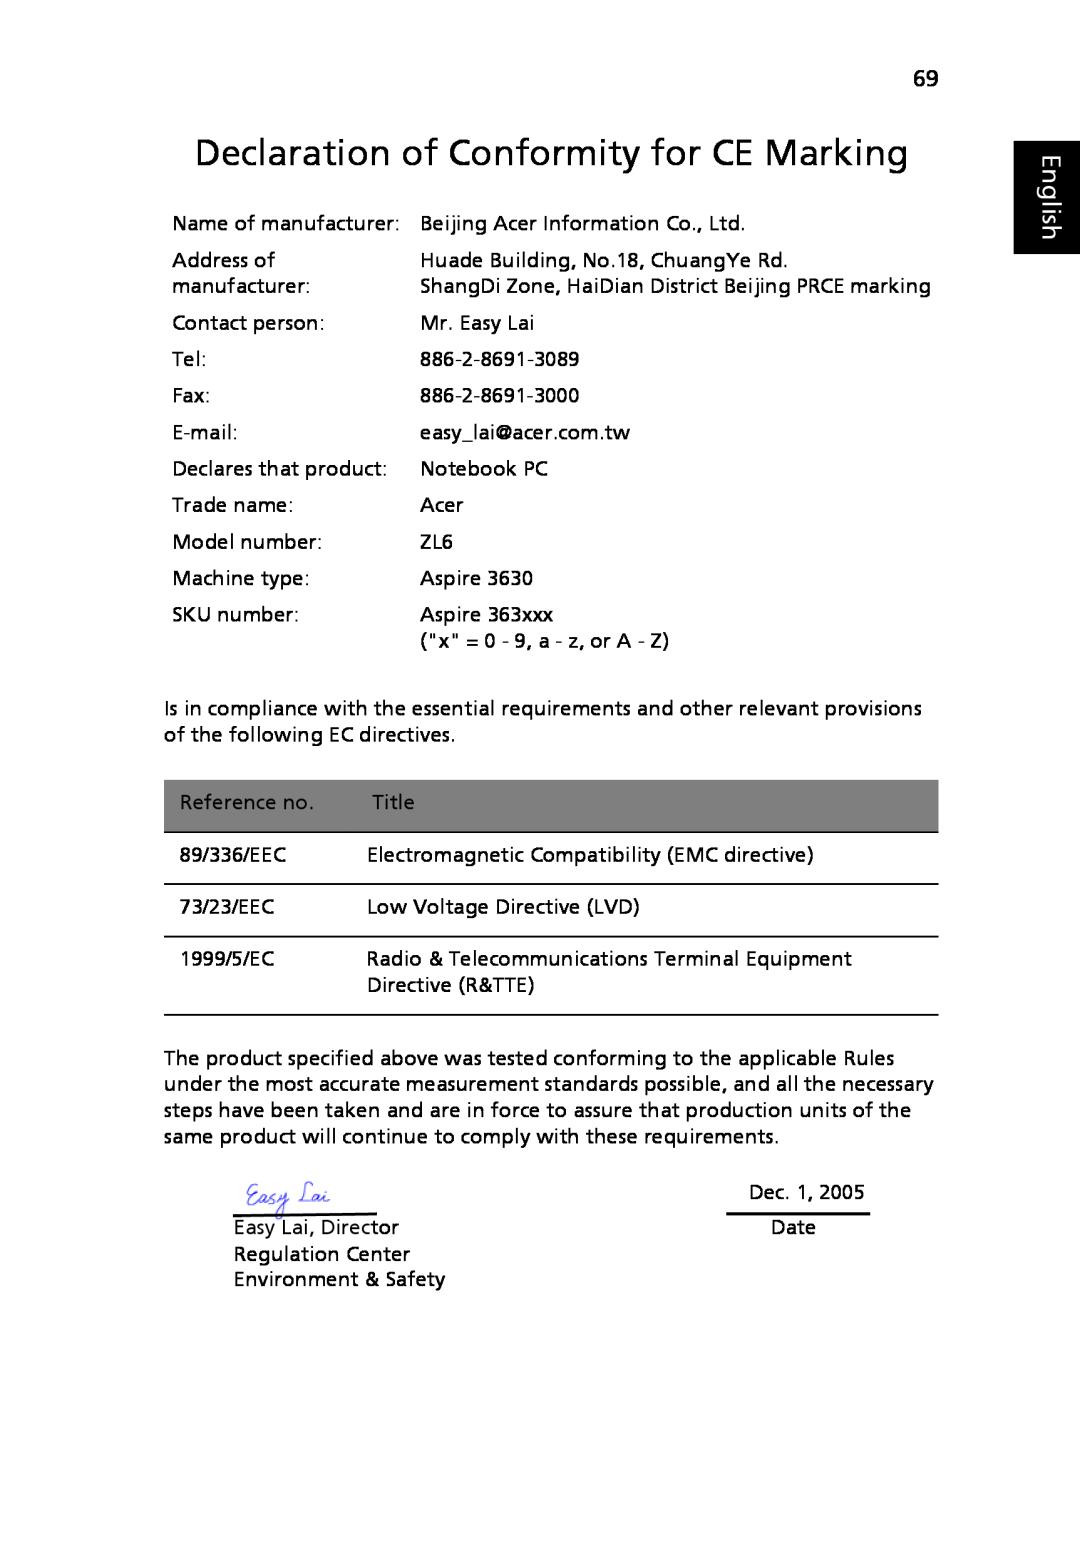 Acer 3630 manual Declaration of Conformity for CE Marking, English 